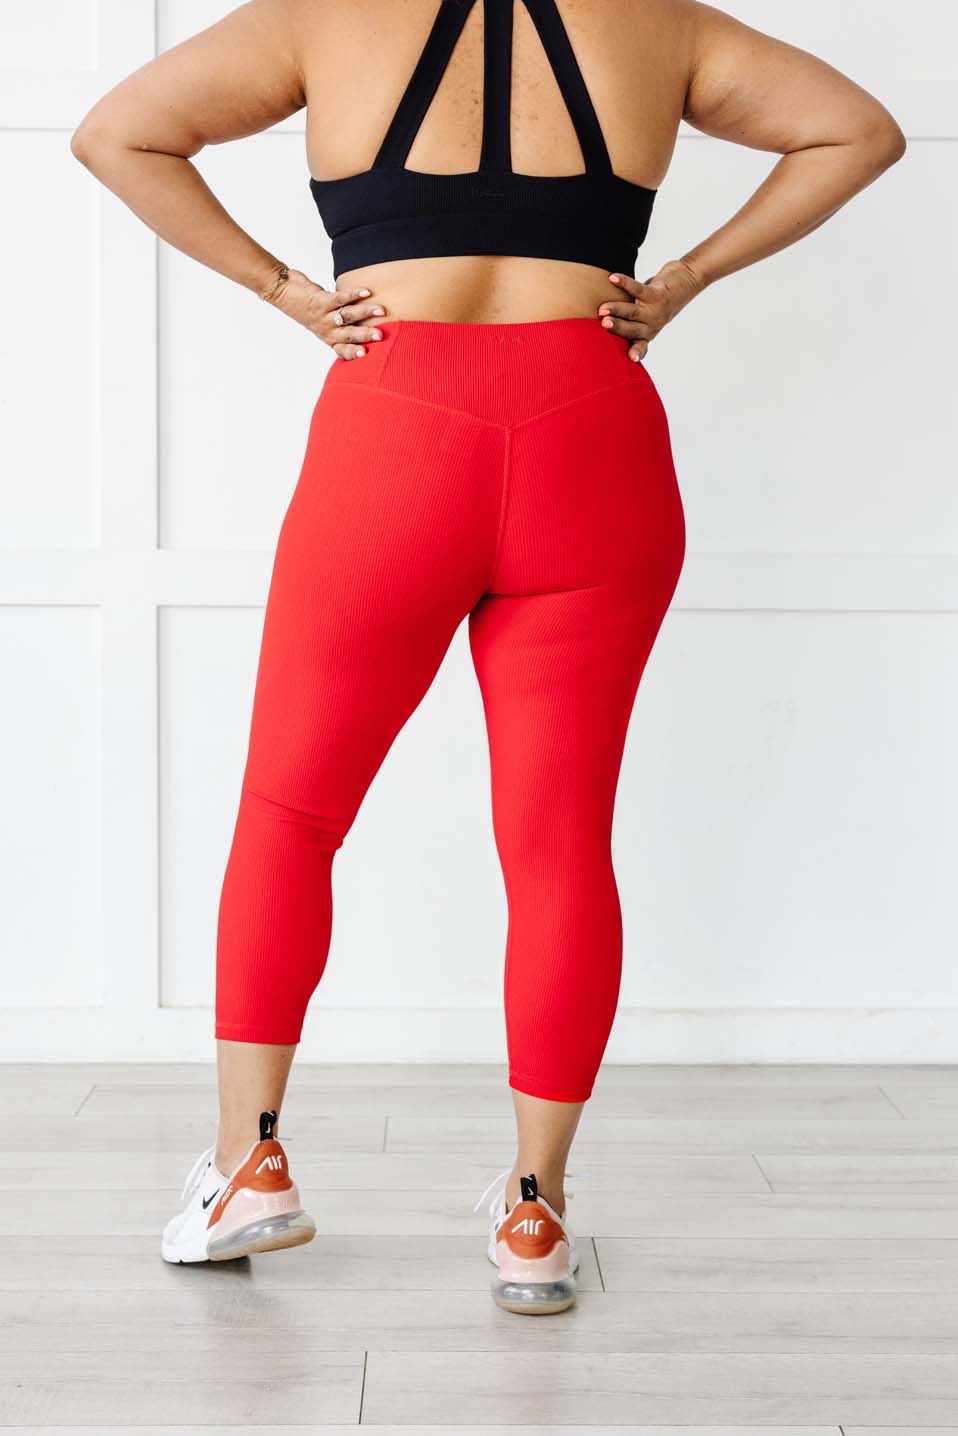 Active Wear | Cotton stretch Leggings | Freeup